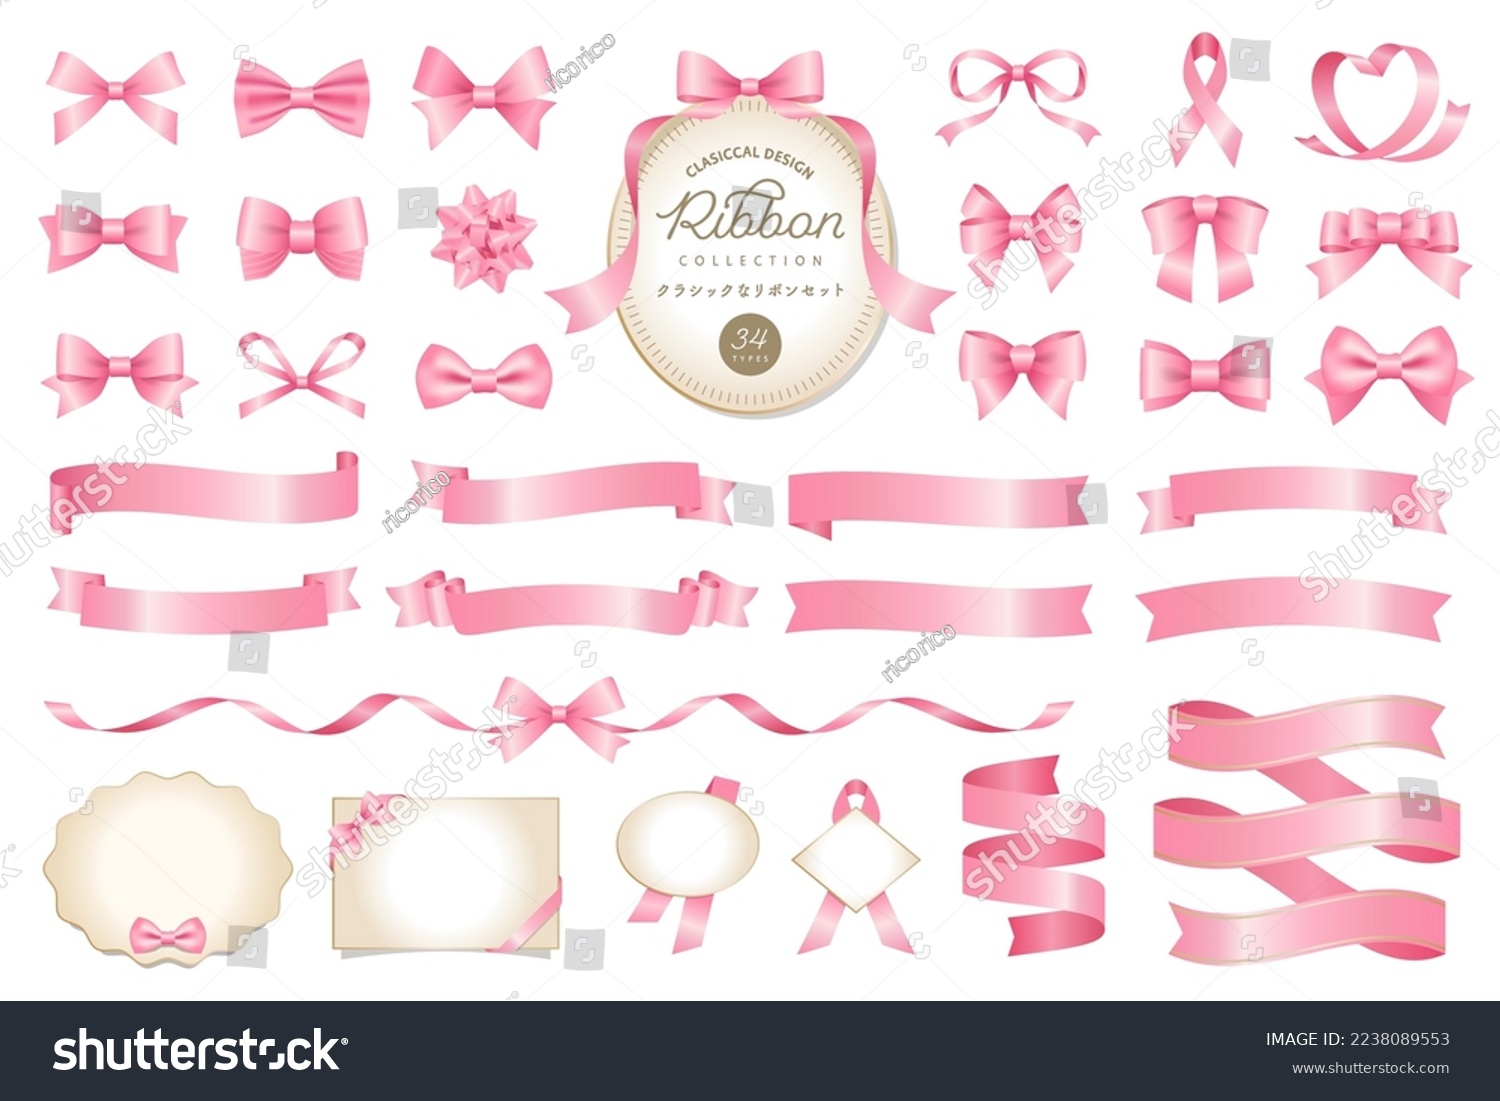 34 sets of pink color ribbon illustrations. Classic and gorgeous ornaments and frames. Good for valentine's day and mother's day ( Text transition : "Classic ribbon illustrations") #2238089553